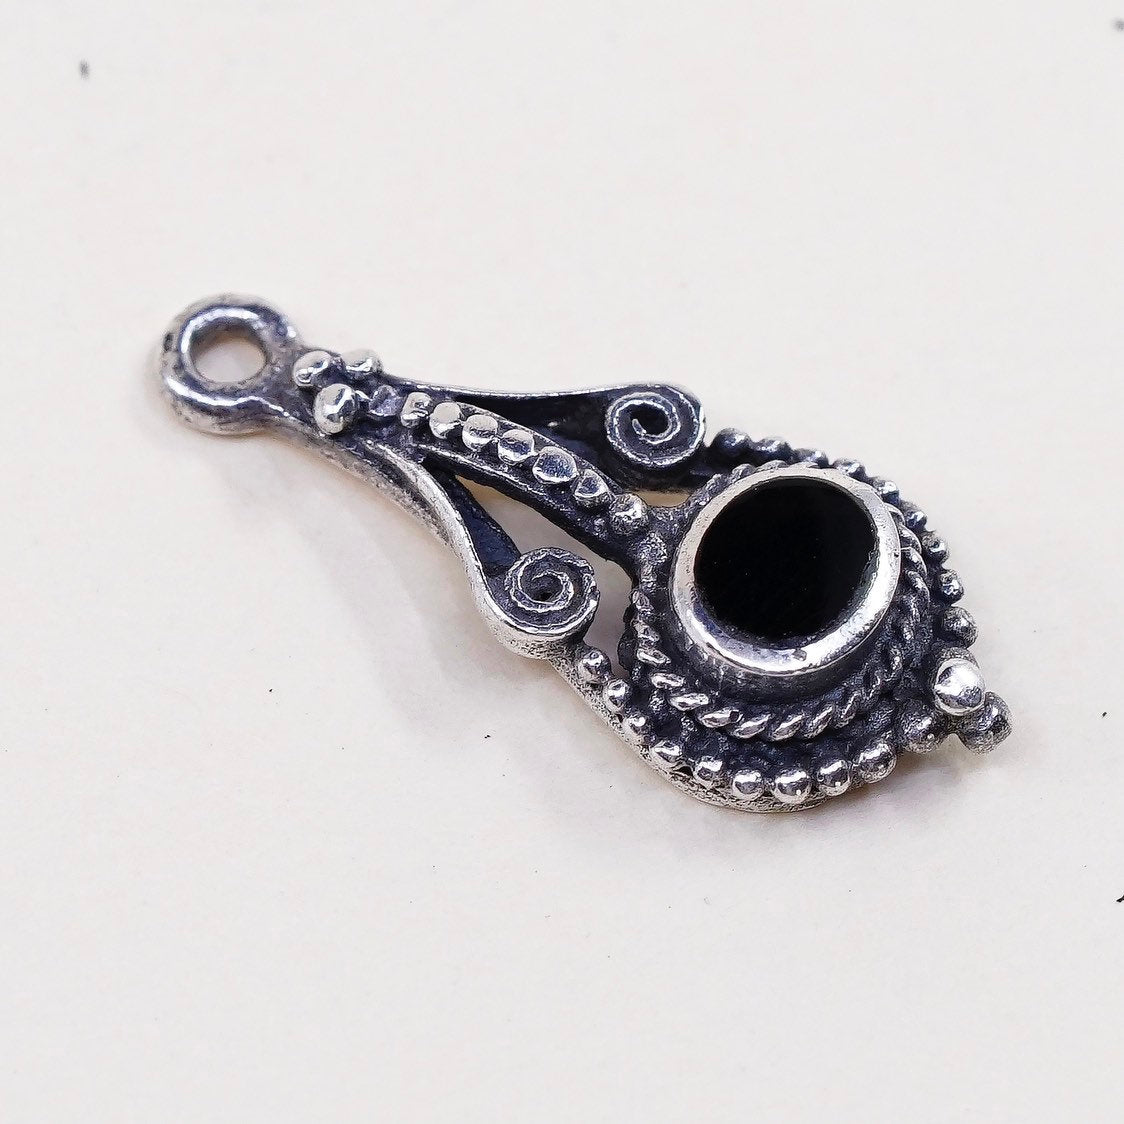 VTG sterling sterling silver handmade pendant, 925 charm with obsidian beads